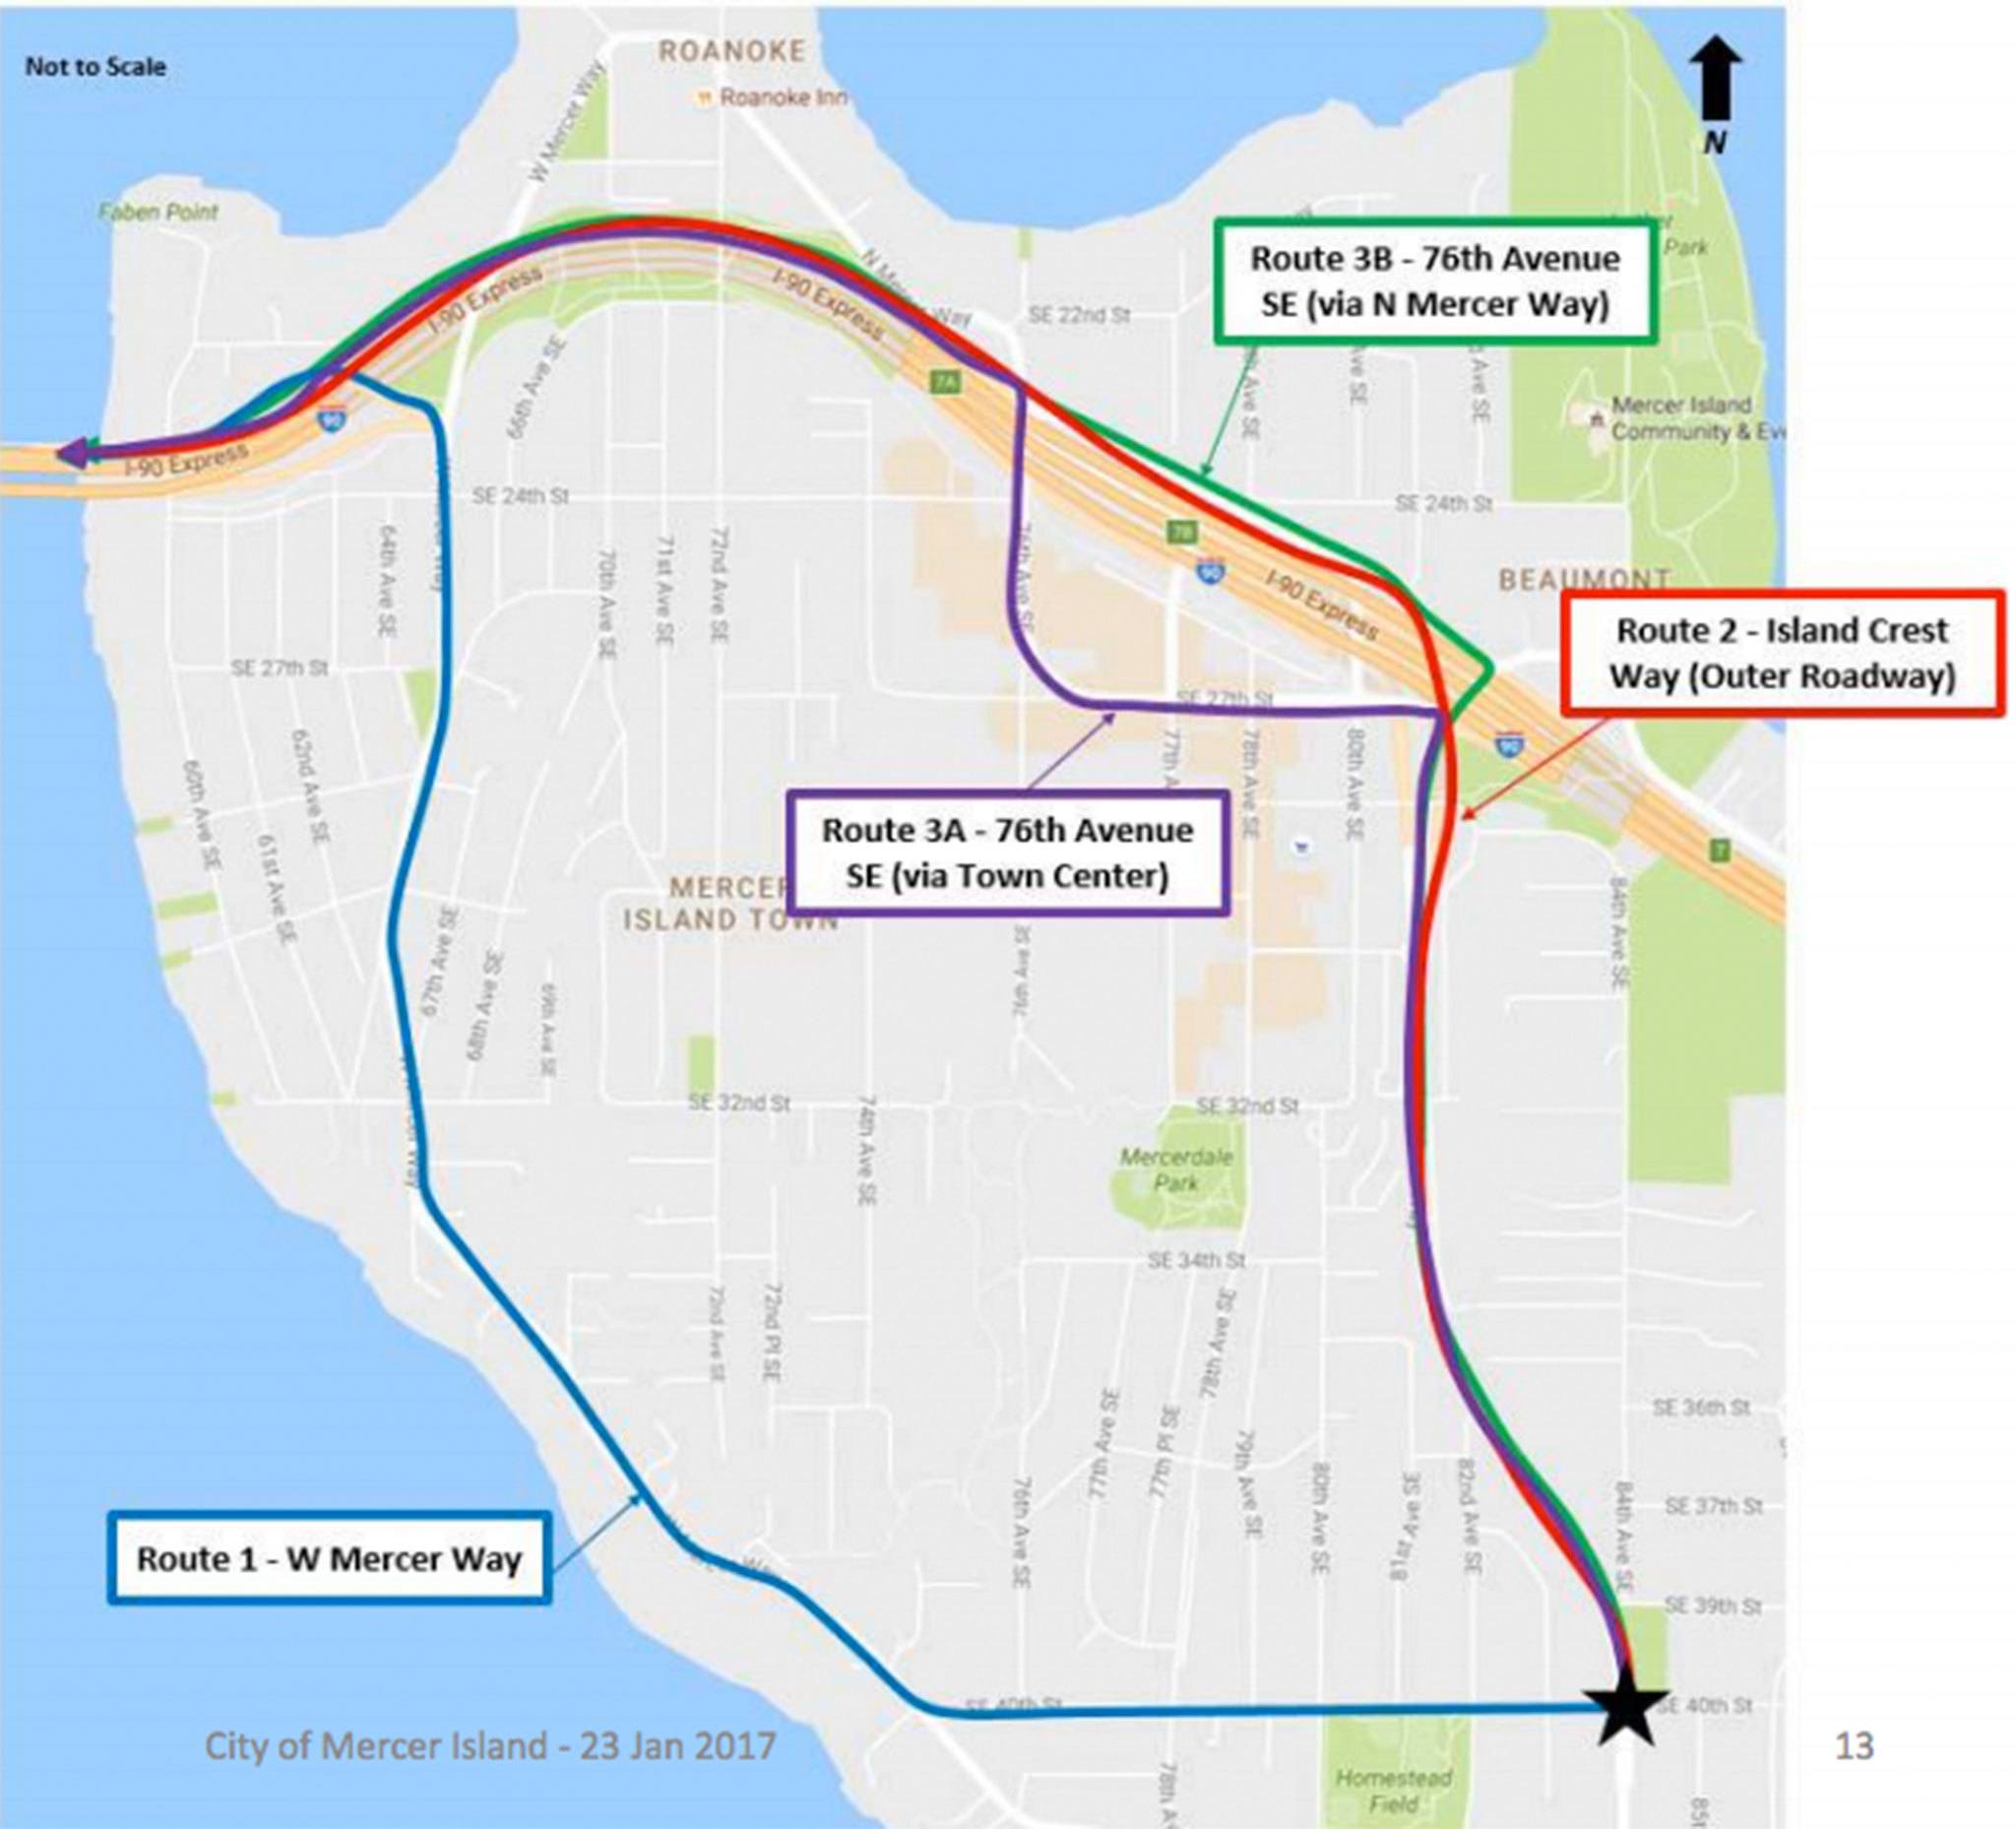 This graphic shows alternative routes for I-90 access in Mercer Island. Image courtesy of Sound Transit